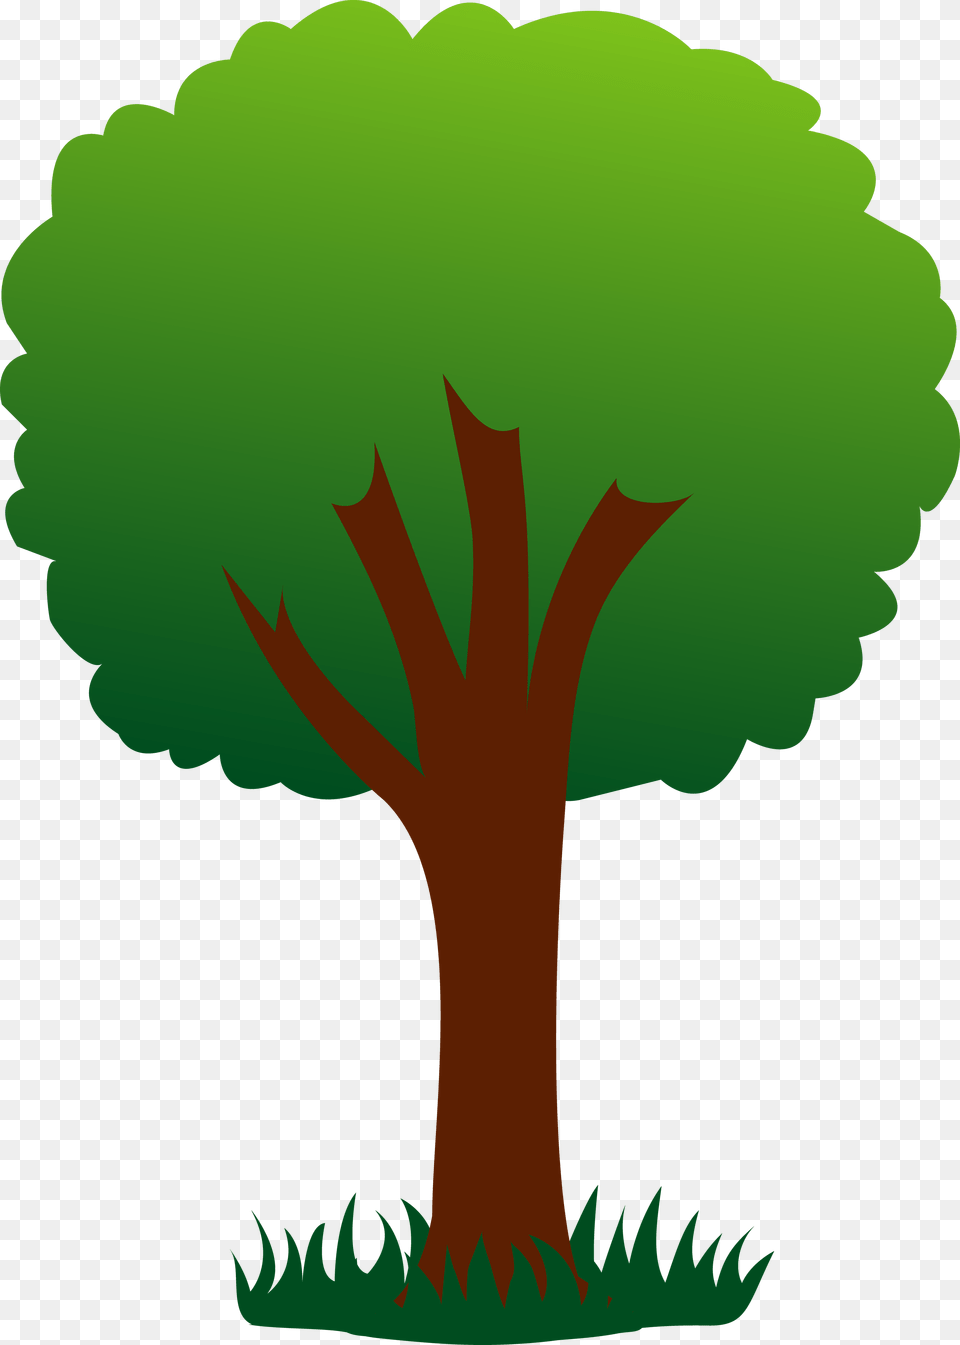 Other Popular Collections Tree In A Garden Cartoon, Plant, Vegetation, Green, Person Png Image